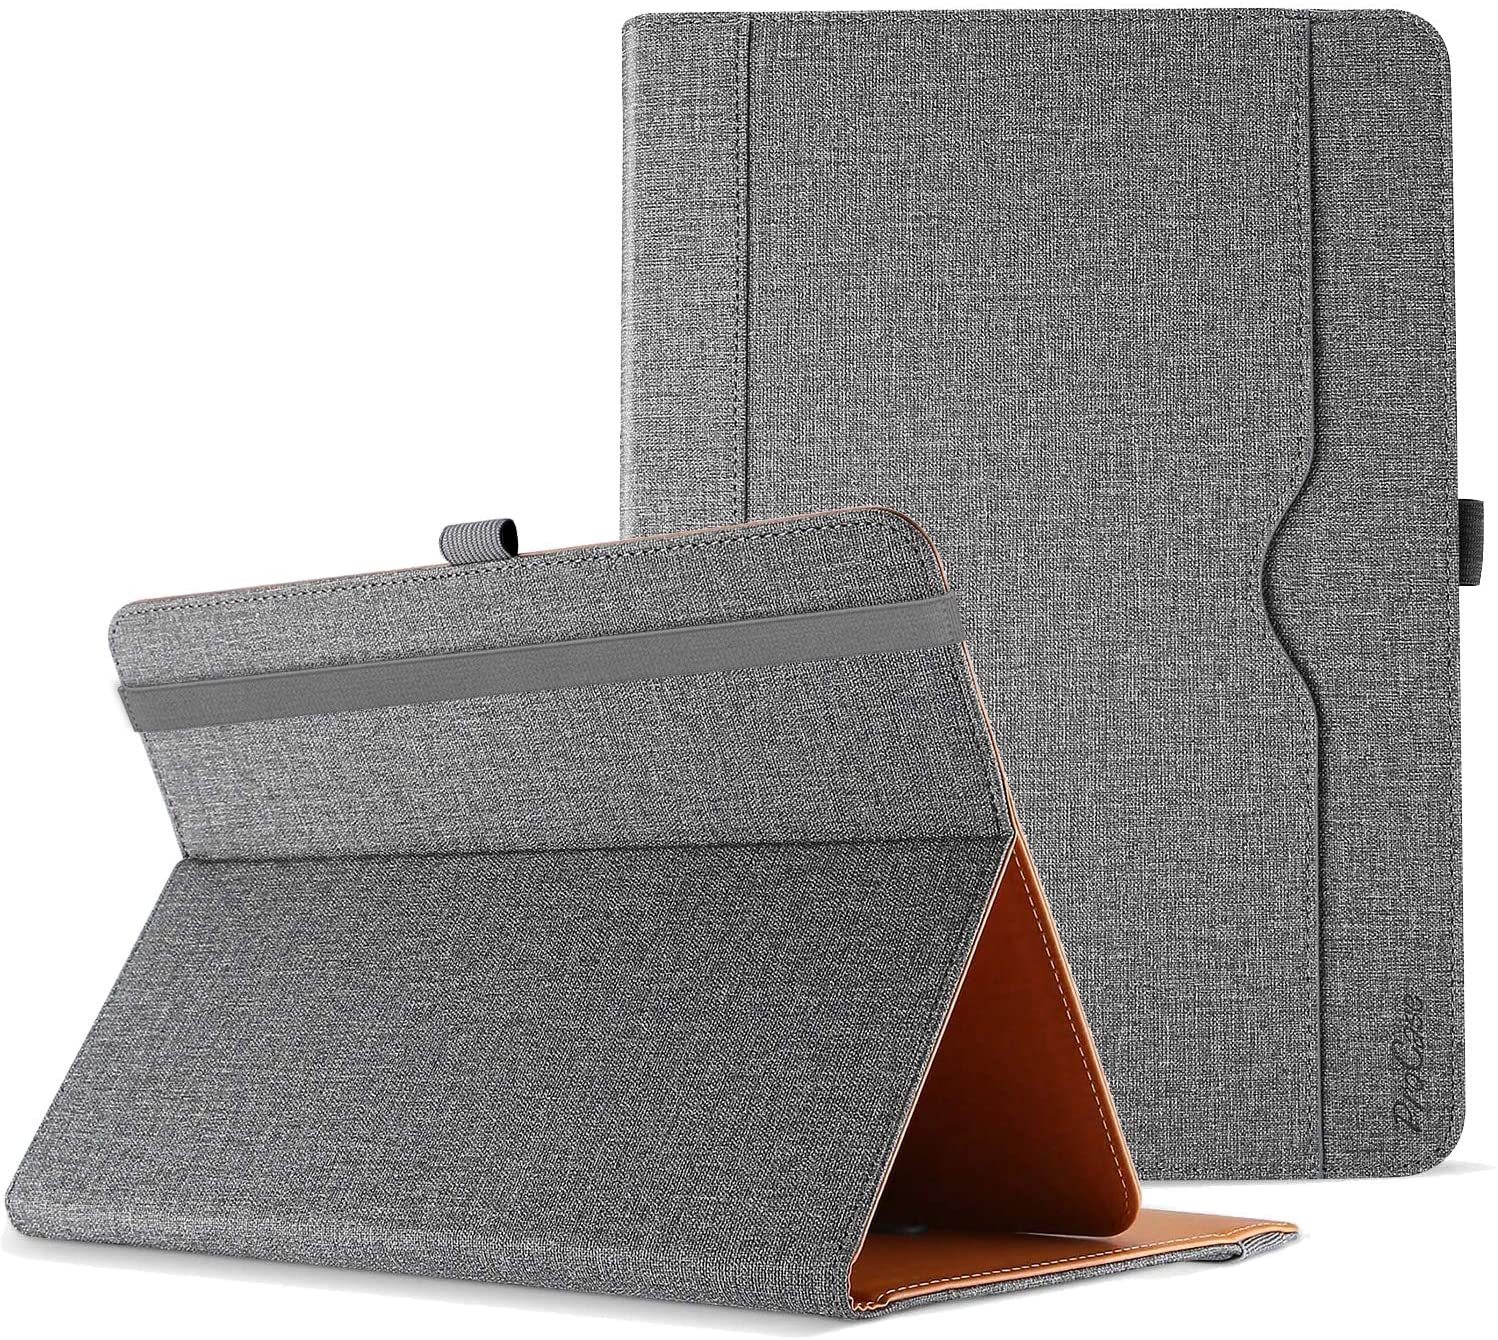 ProCase Universal Case for 9-10 inch Tablet - grey - e4cents